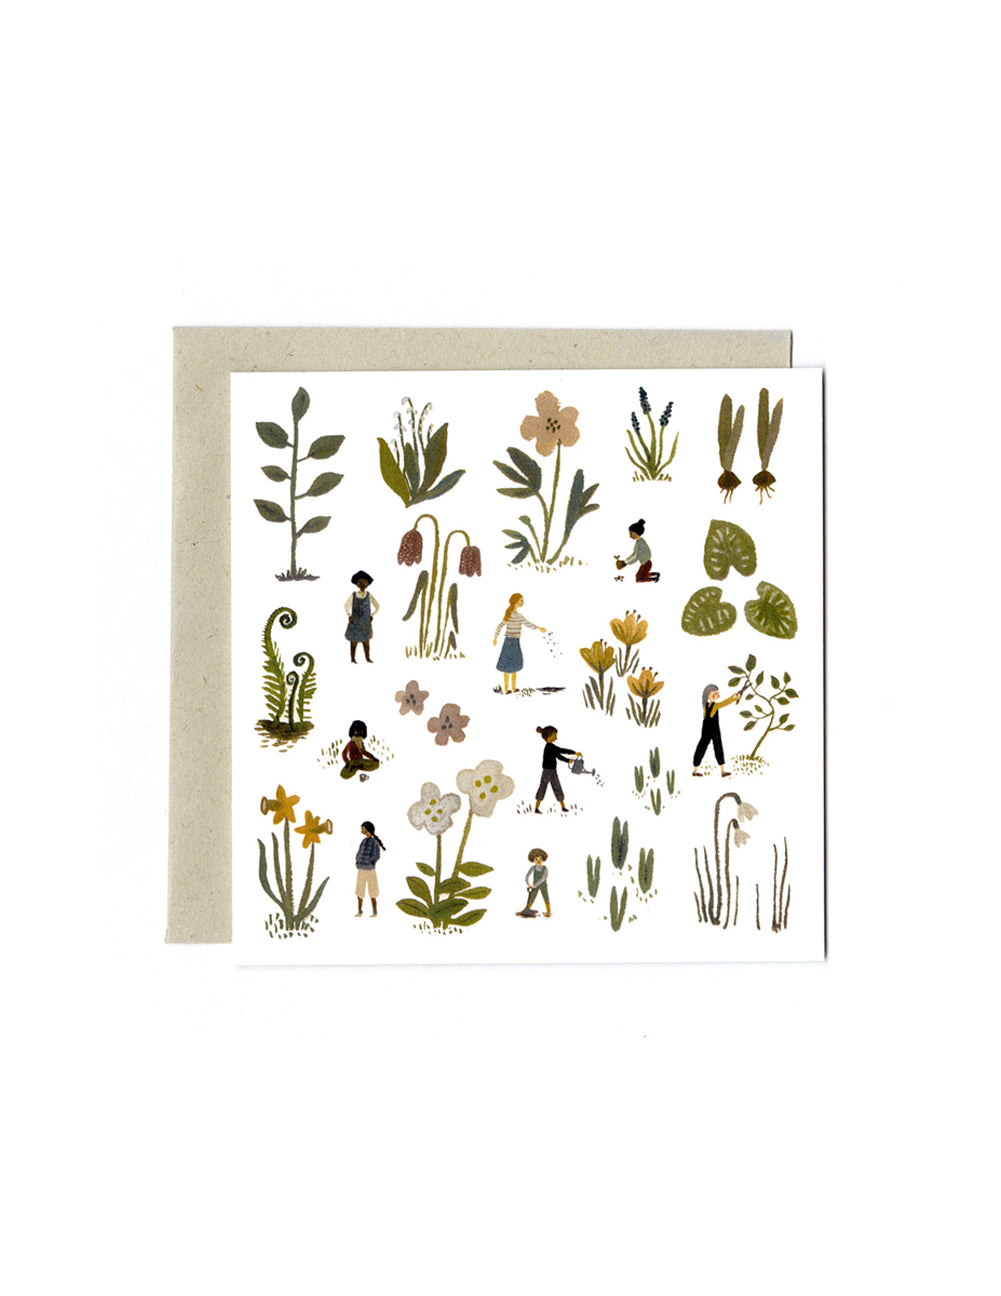 Cultivate' Greeting Card by Gemma Koomen, illustrated on 100% recycled card stock, featuring a natural-coloured envelope.